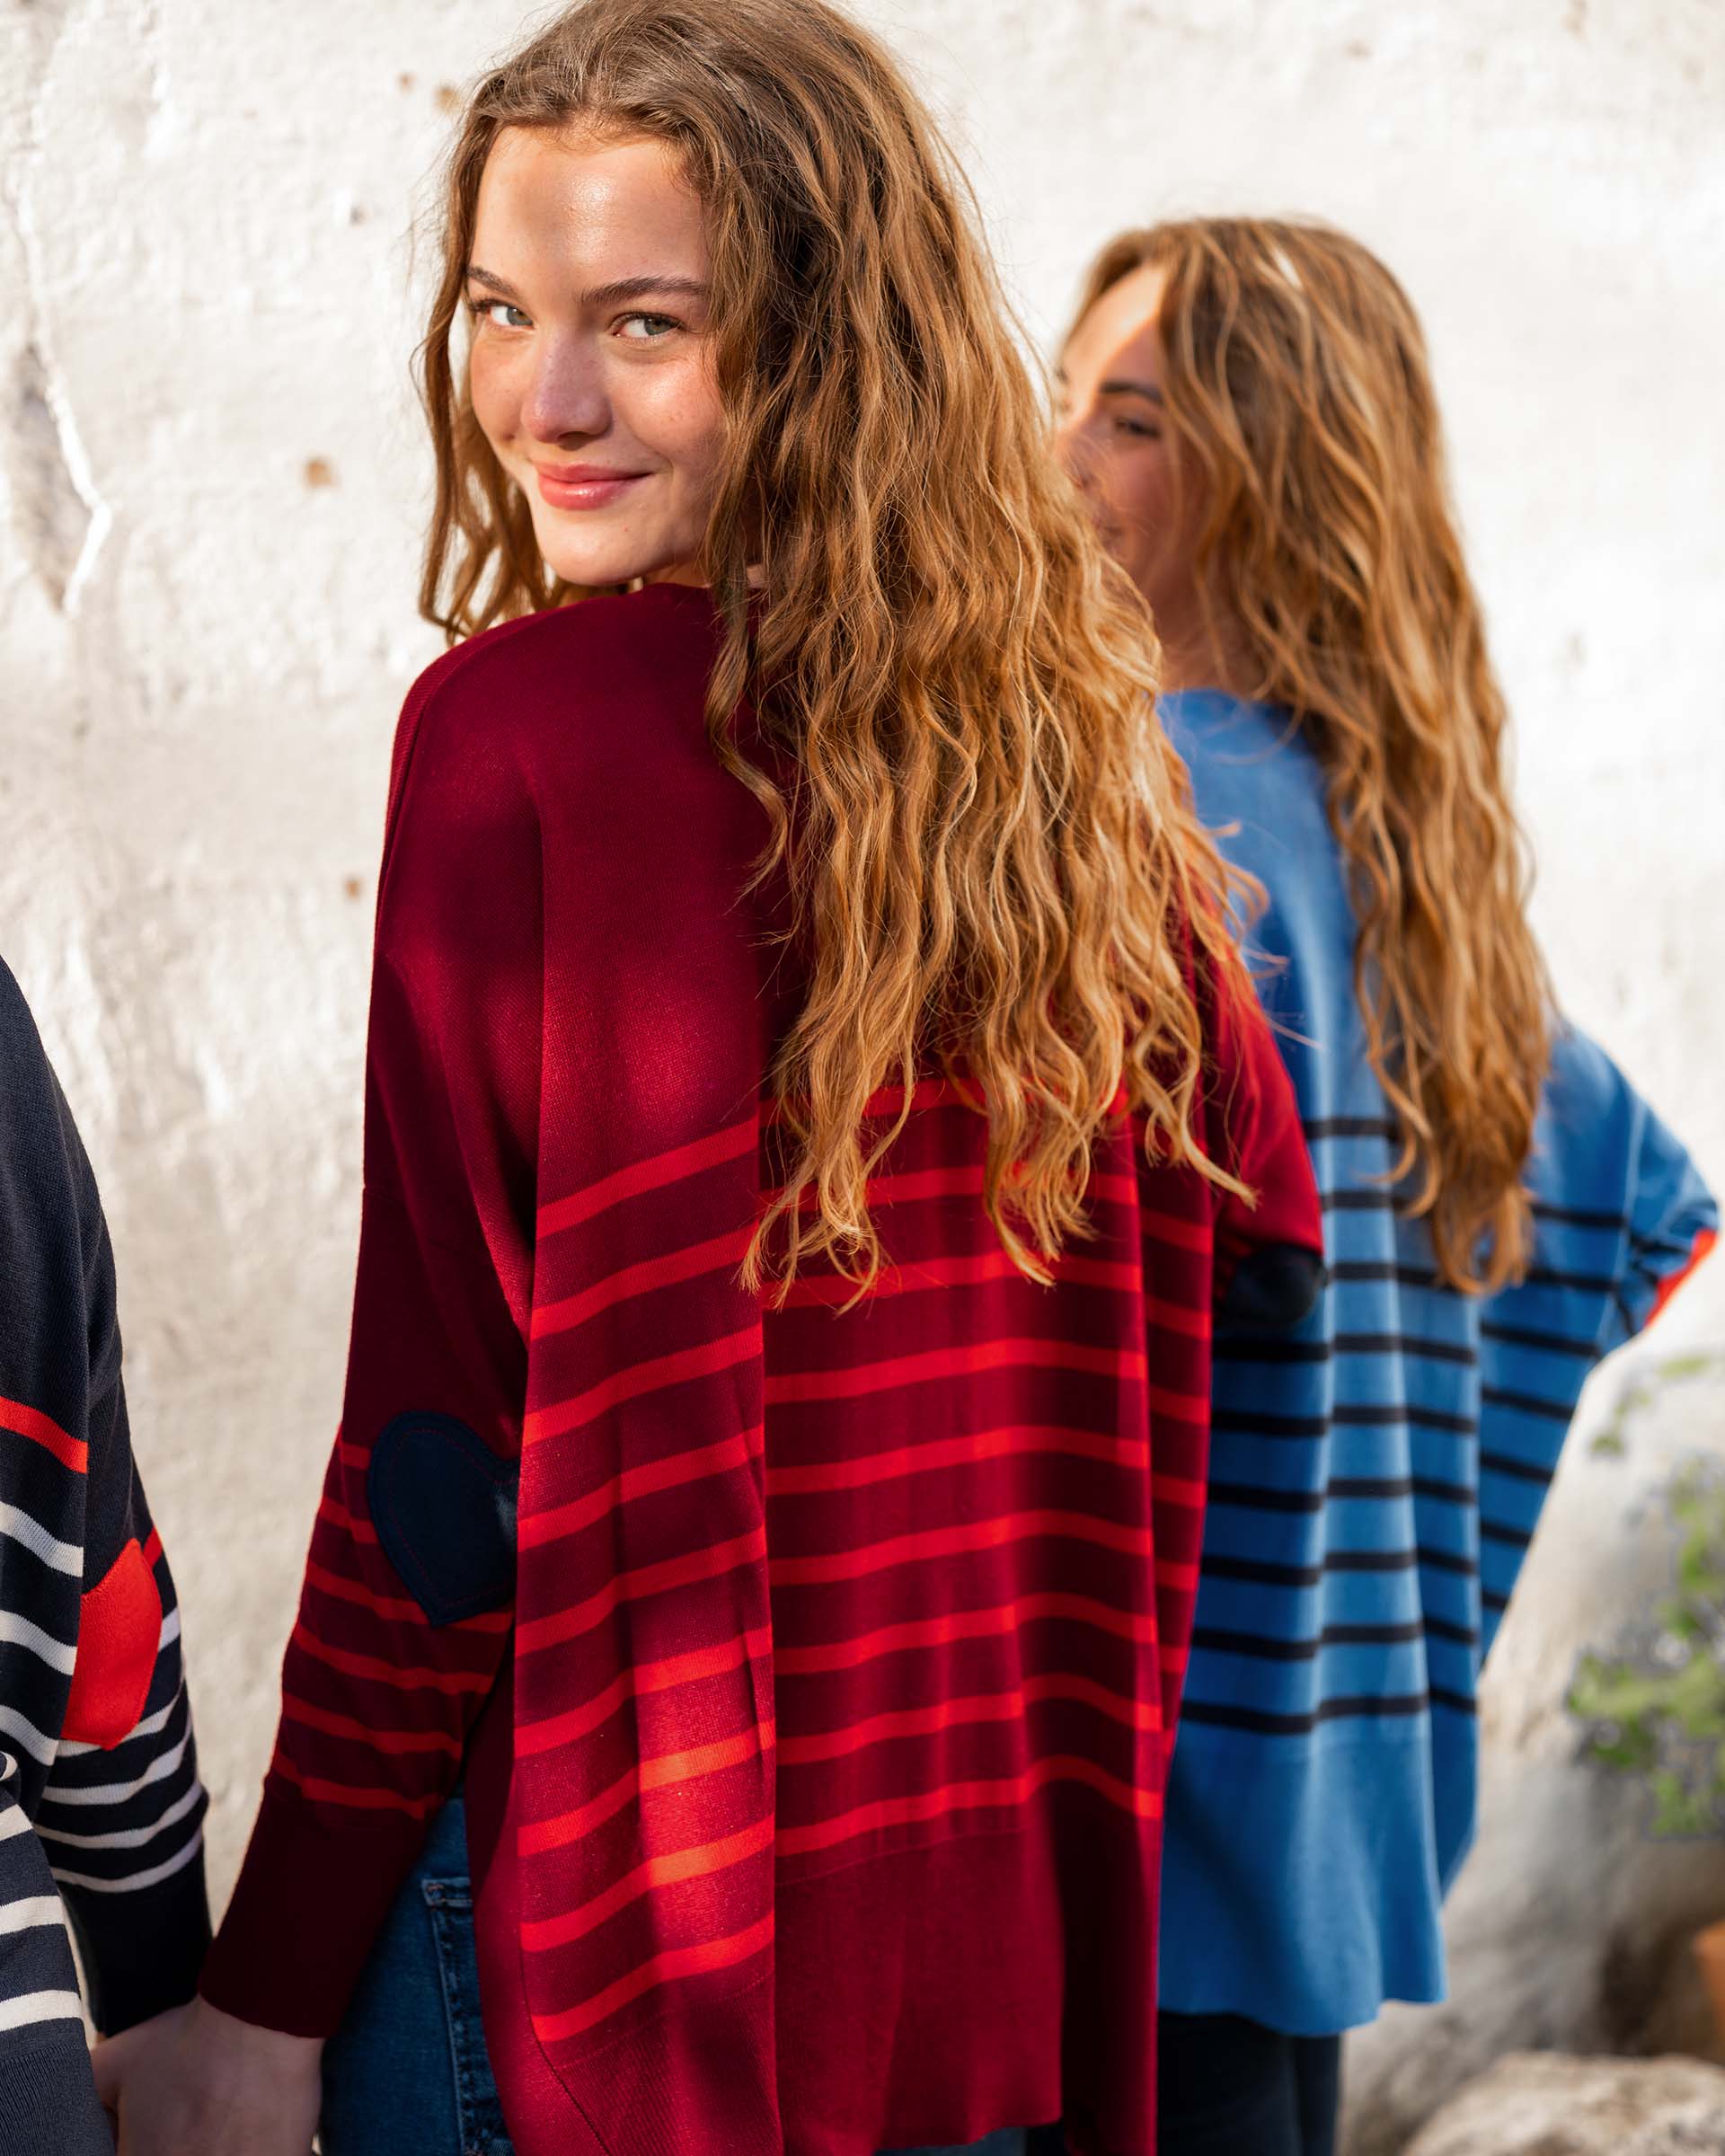 female wearing maroon and red striped sweater in front of white wall with friends